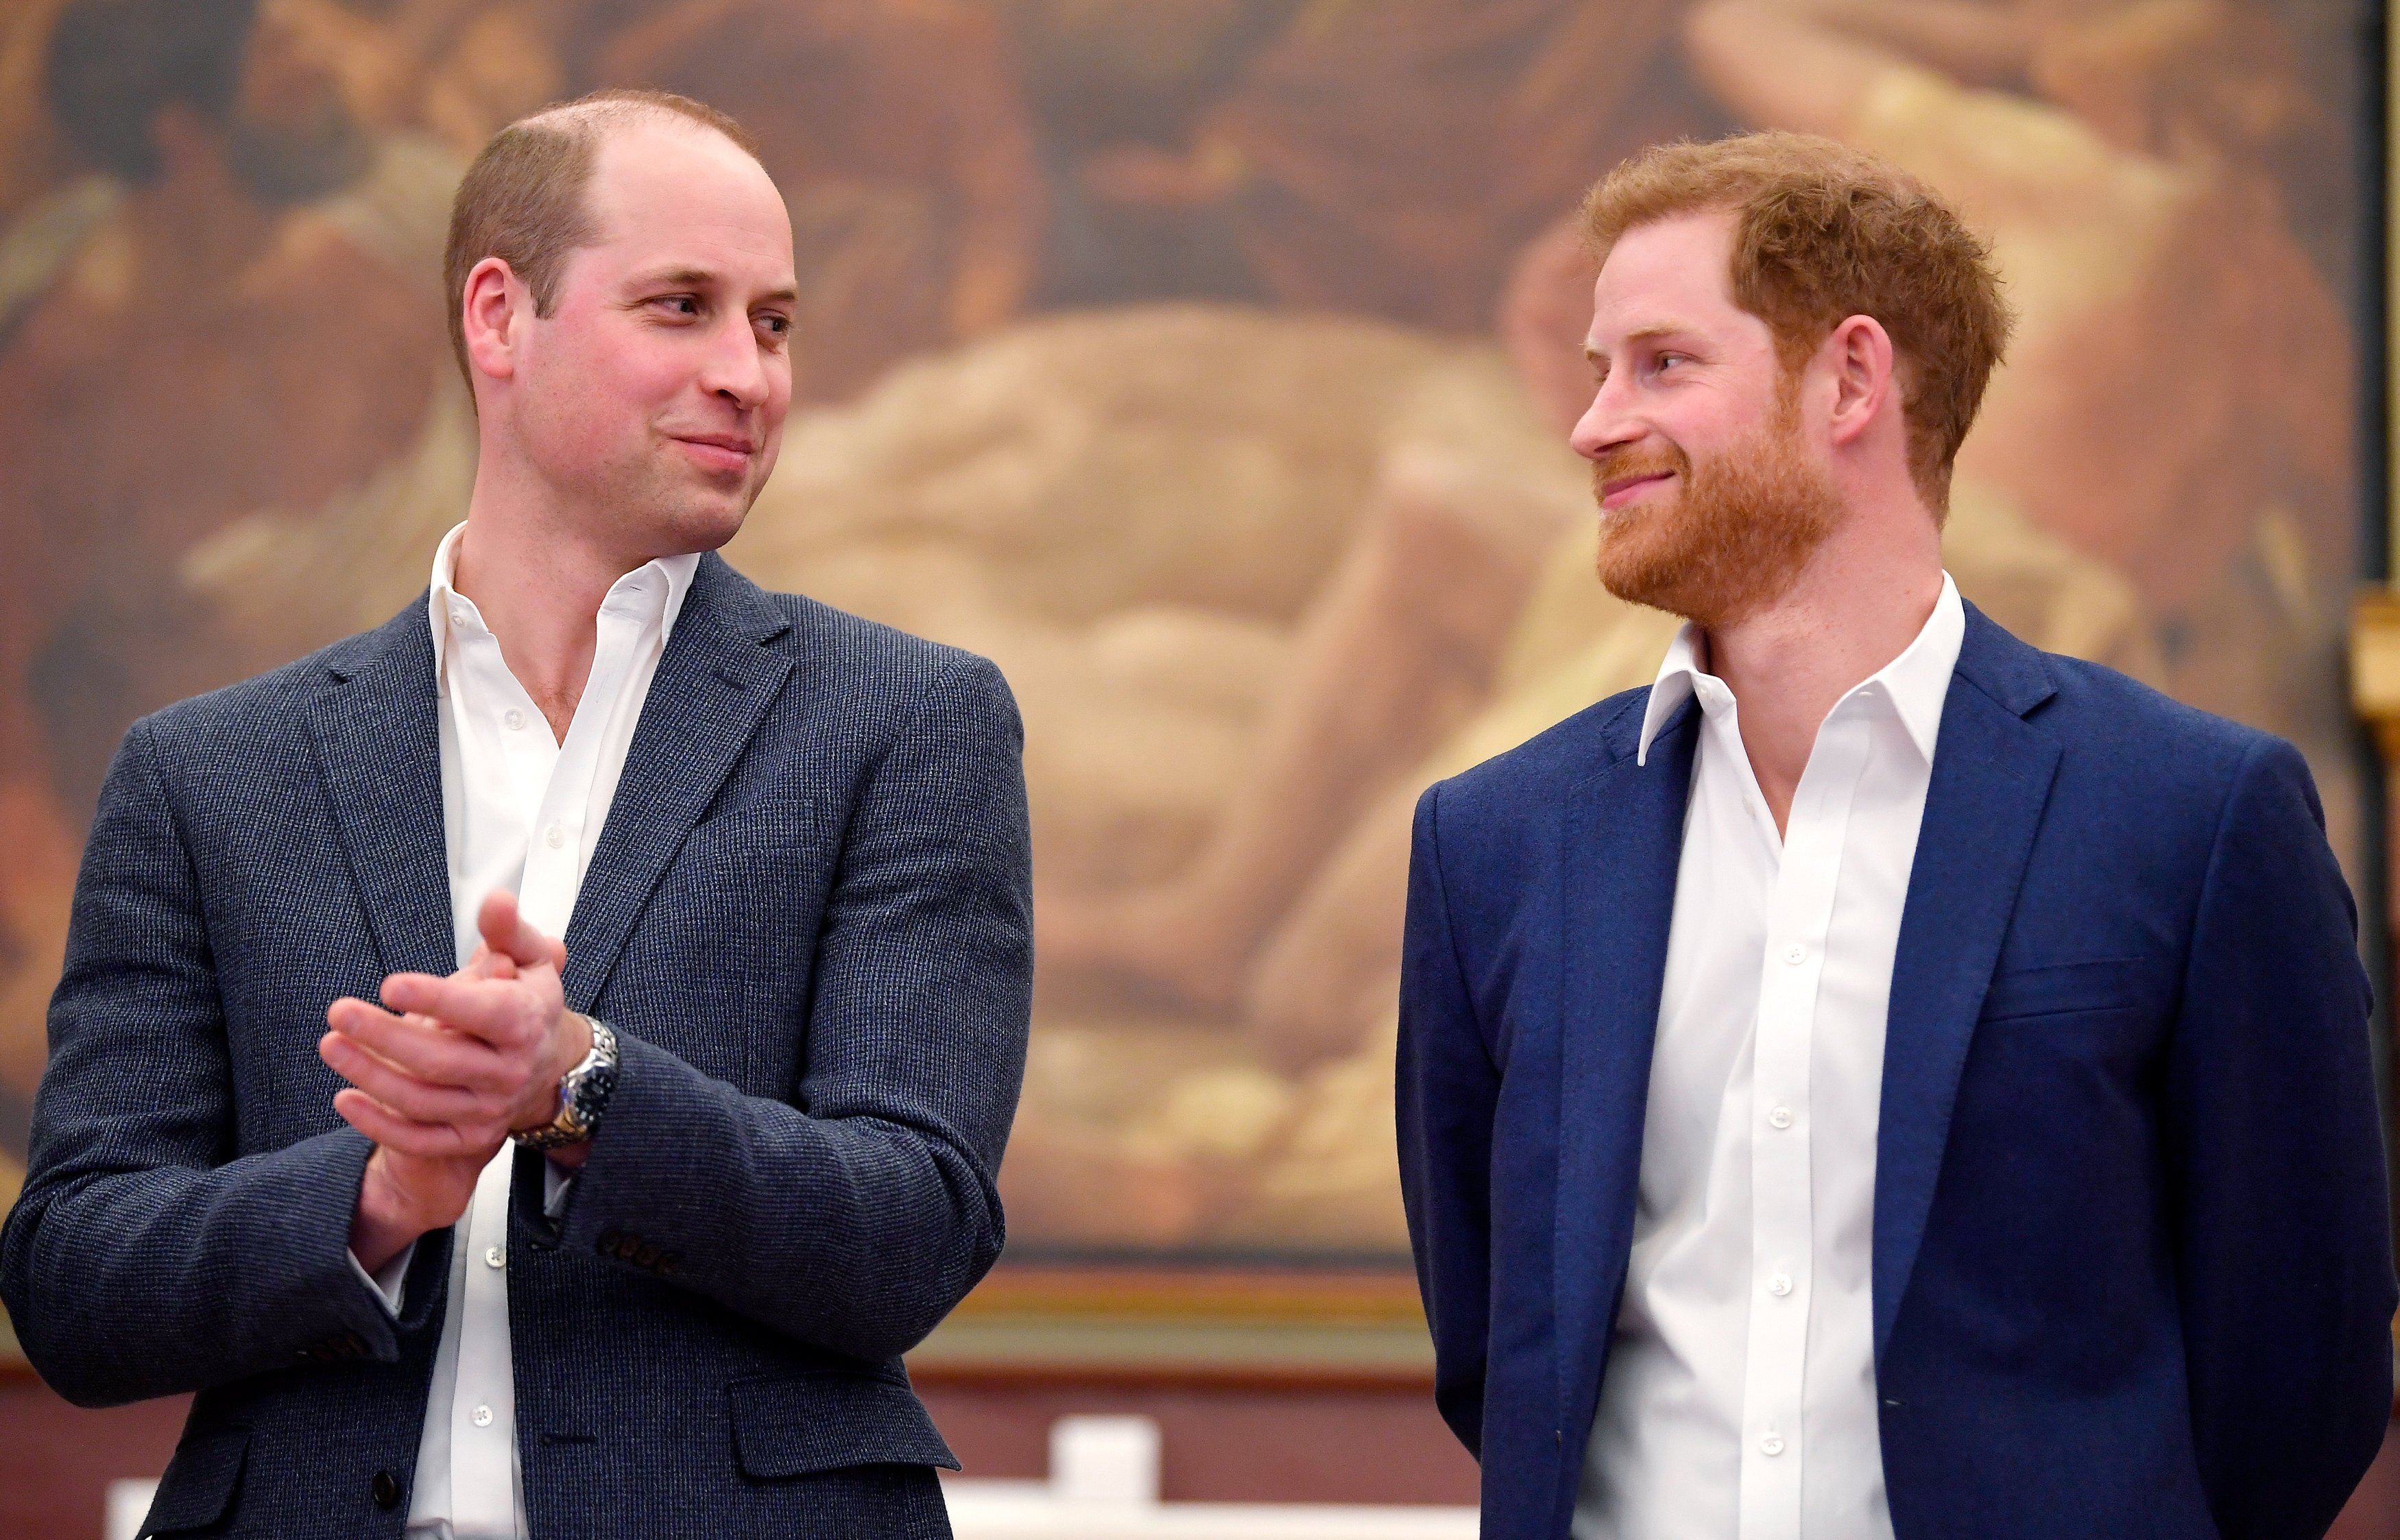 Prince William and Prince Harry attend the opening of the Greenhouse Sports Centre on April 26, 2018, in London, United Kingdom. | Source: Getty Images